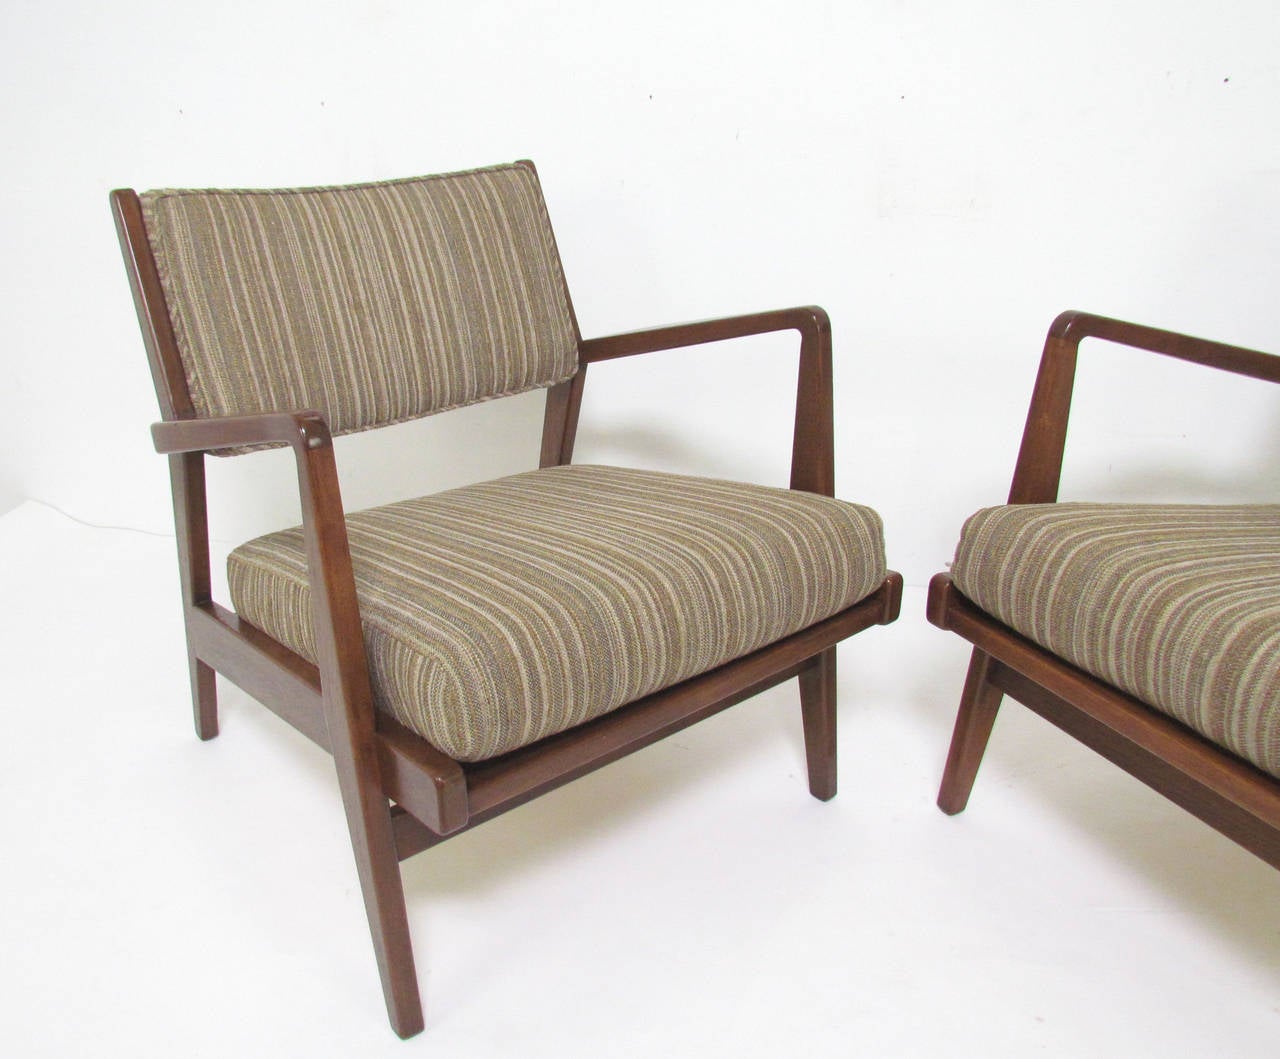 Classic pair of Mid-Century armchairs in walnut and original upholstery by Jens Risom for Jens Risom Design.